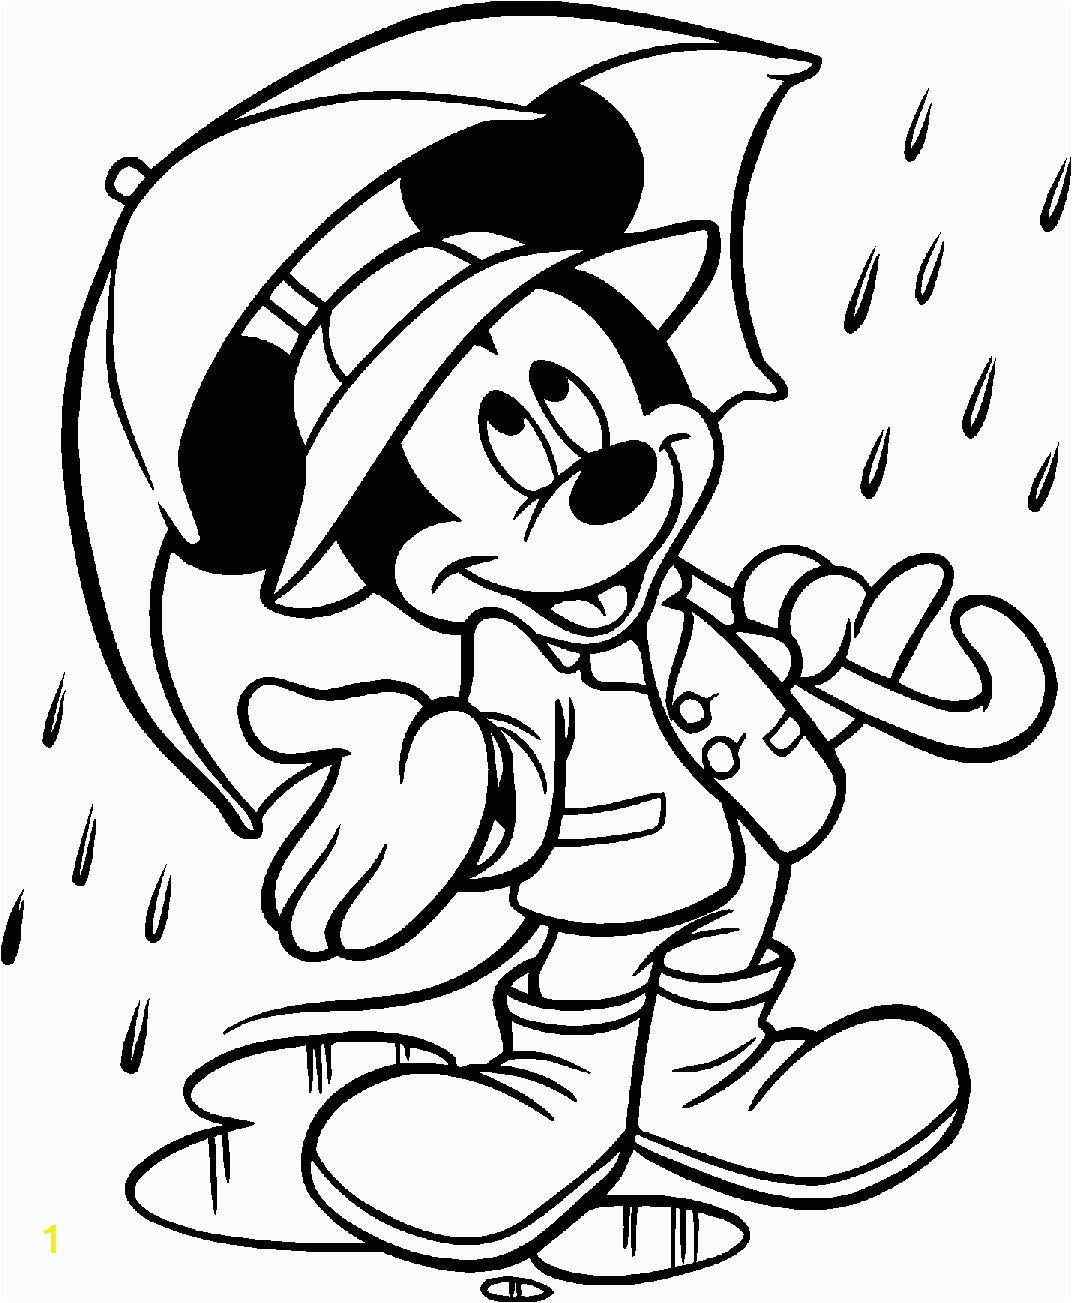 Coloring Pages Printable Mickey Mouse Free Printable Mickey Mouse Coloring Pages for Kids